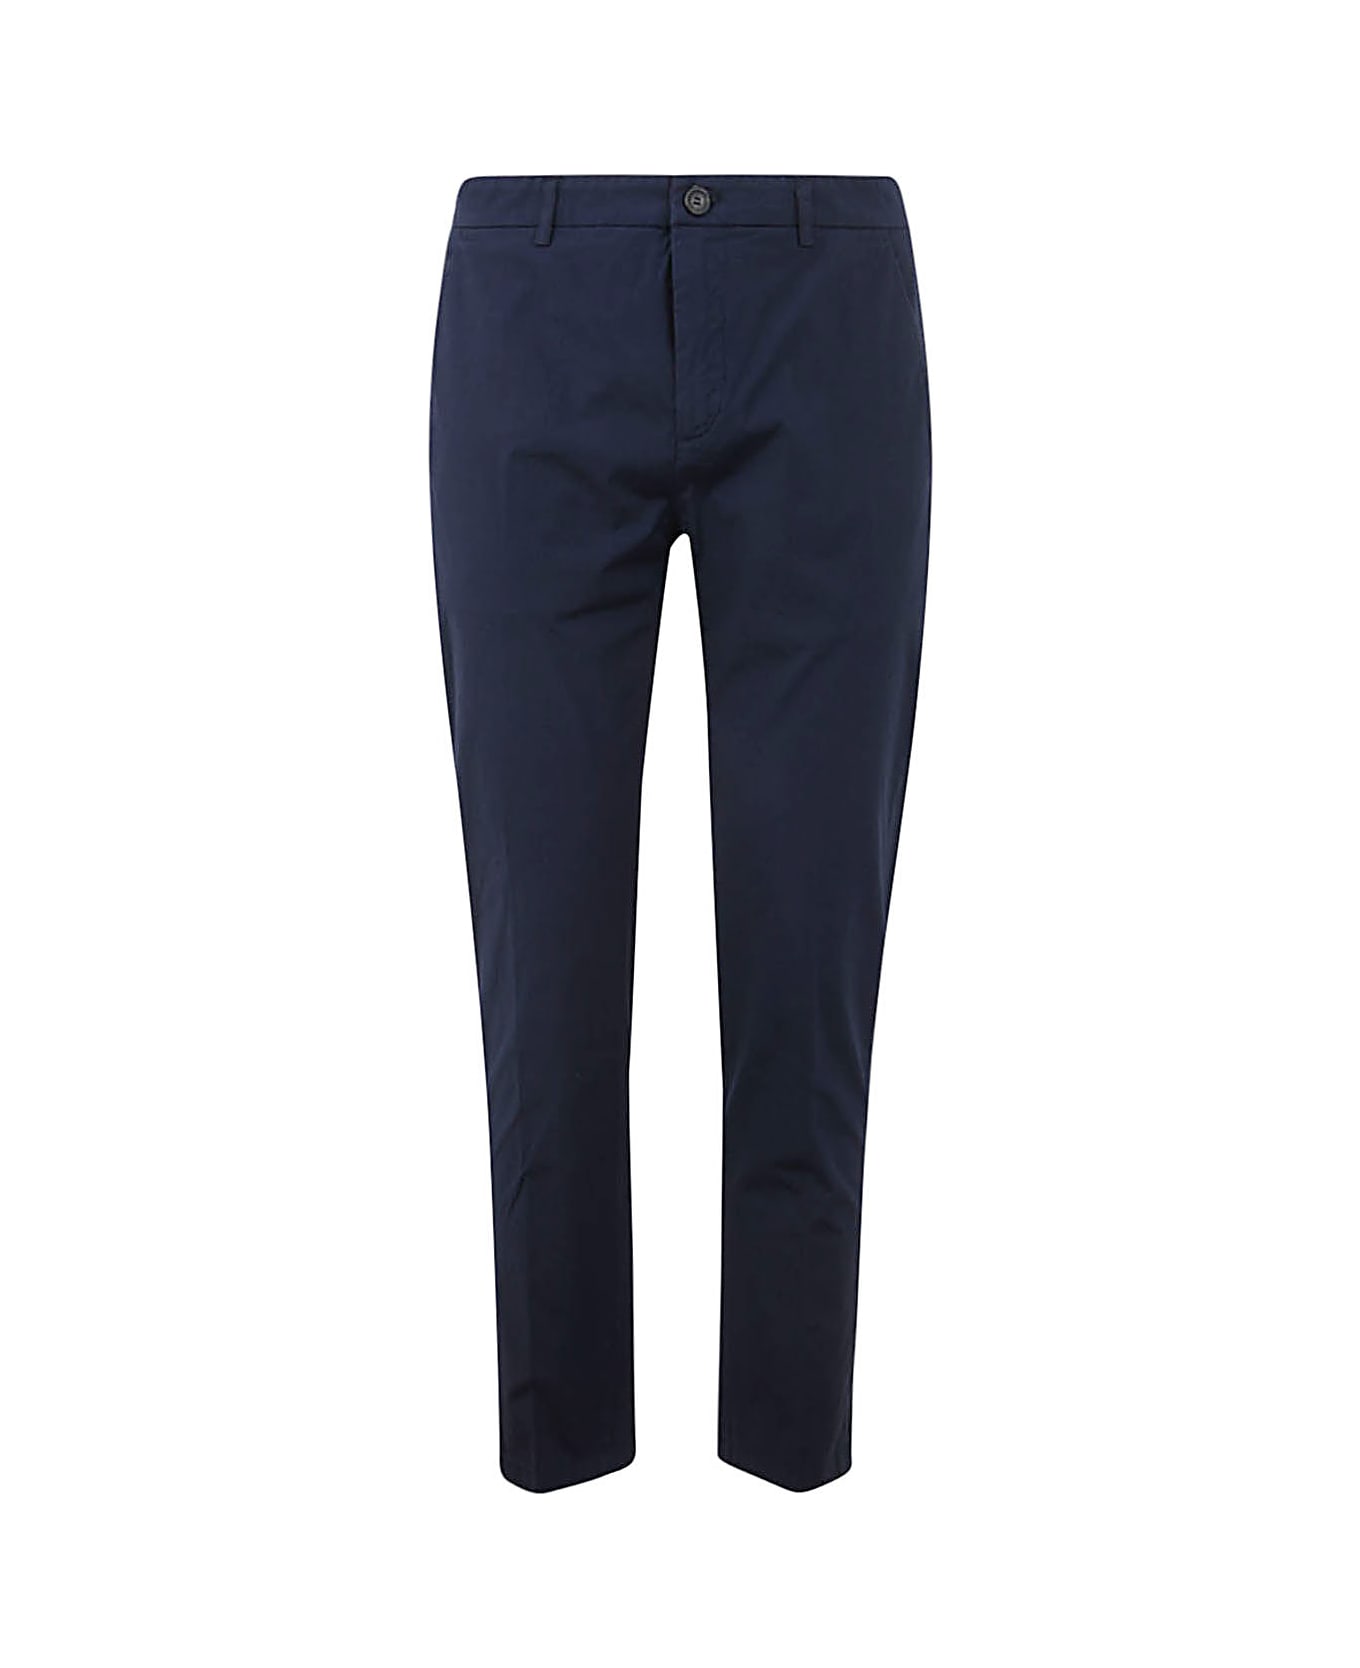 Department Five Prince Crop Chino Trousers - Navy